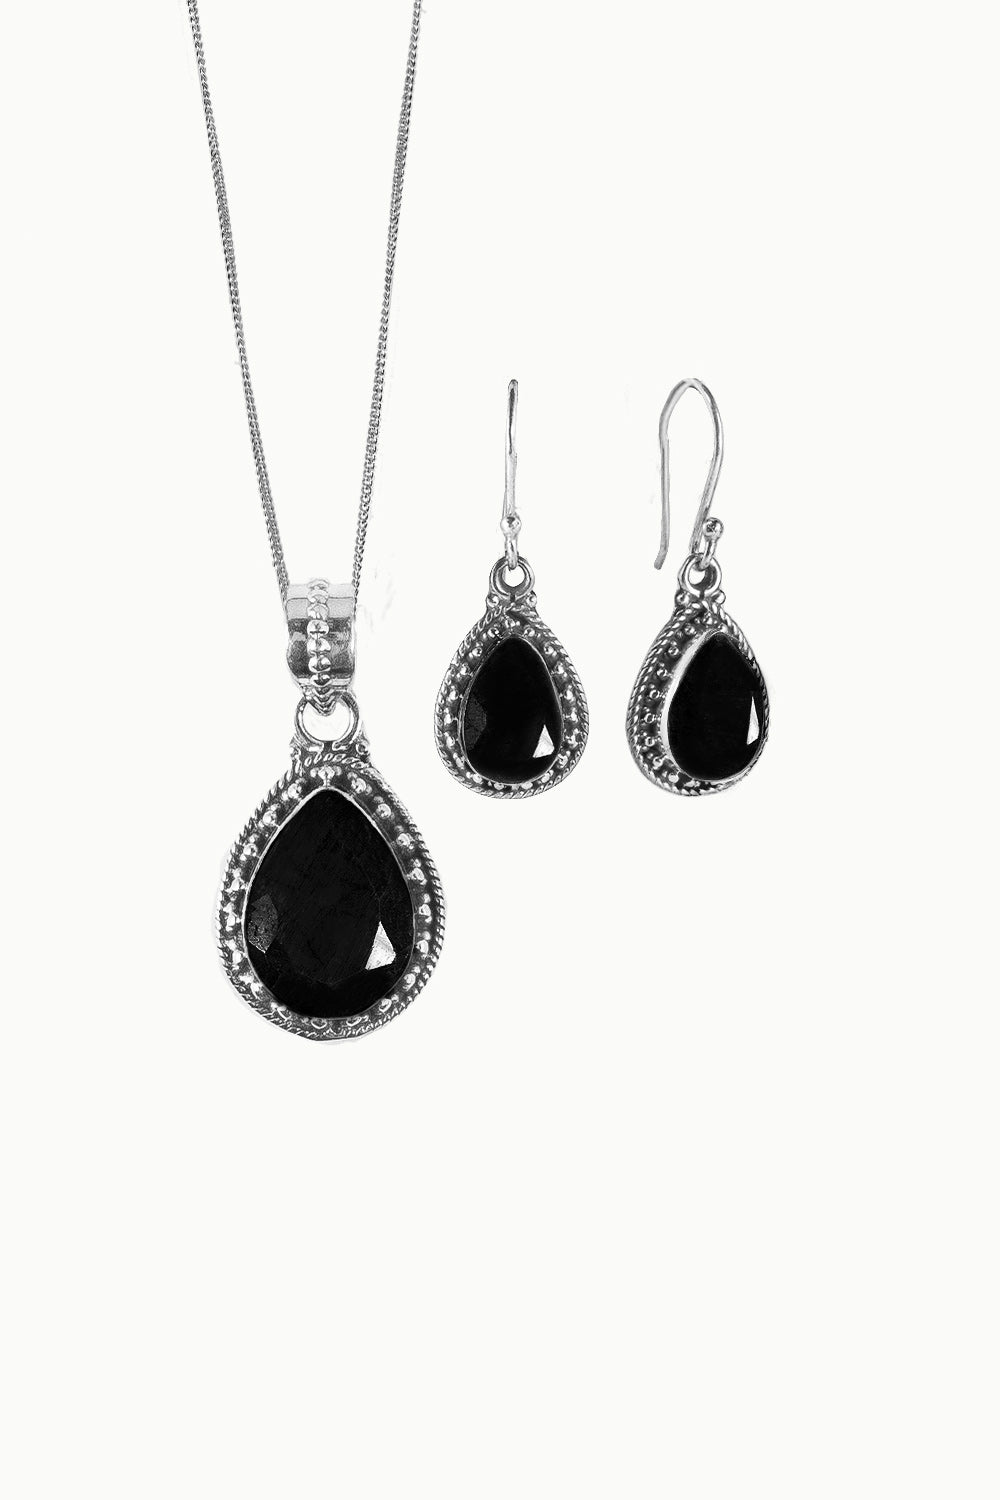 Sivalya Black Onyx Necklace and Earrings Set Sterling Silver - Amalfi